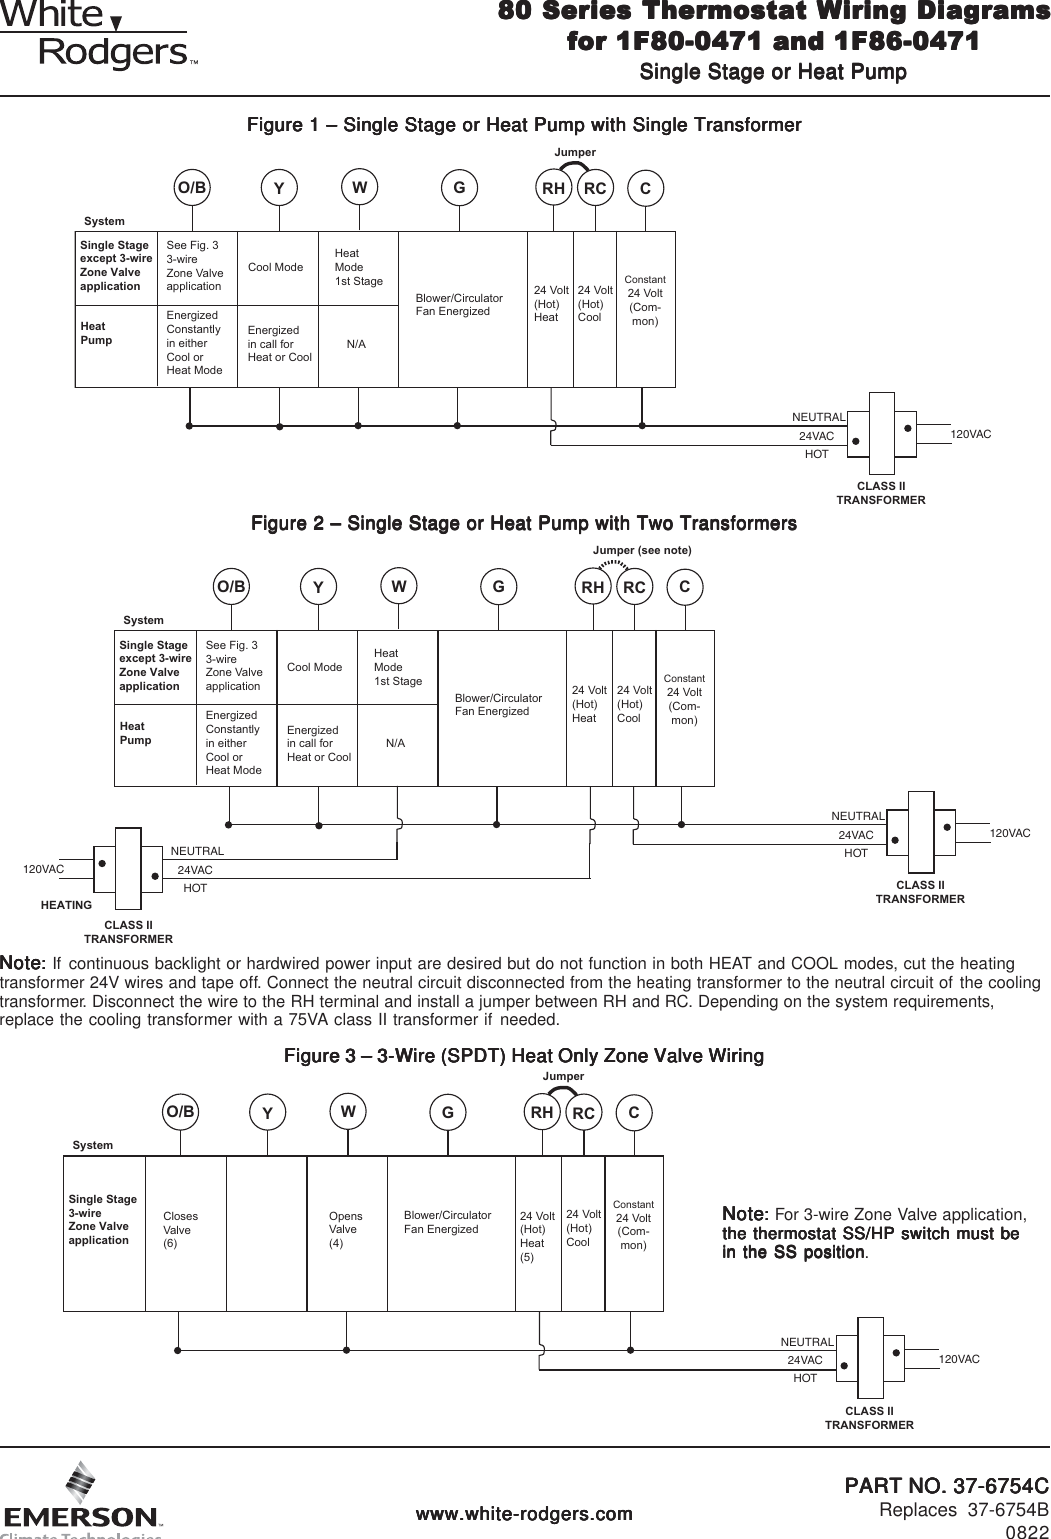 Wiring Diagram For White-Rodgers Heat Pump Thermostat Compatible from usermanual.wiki